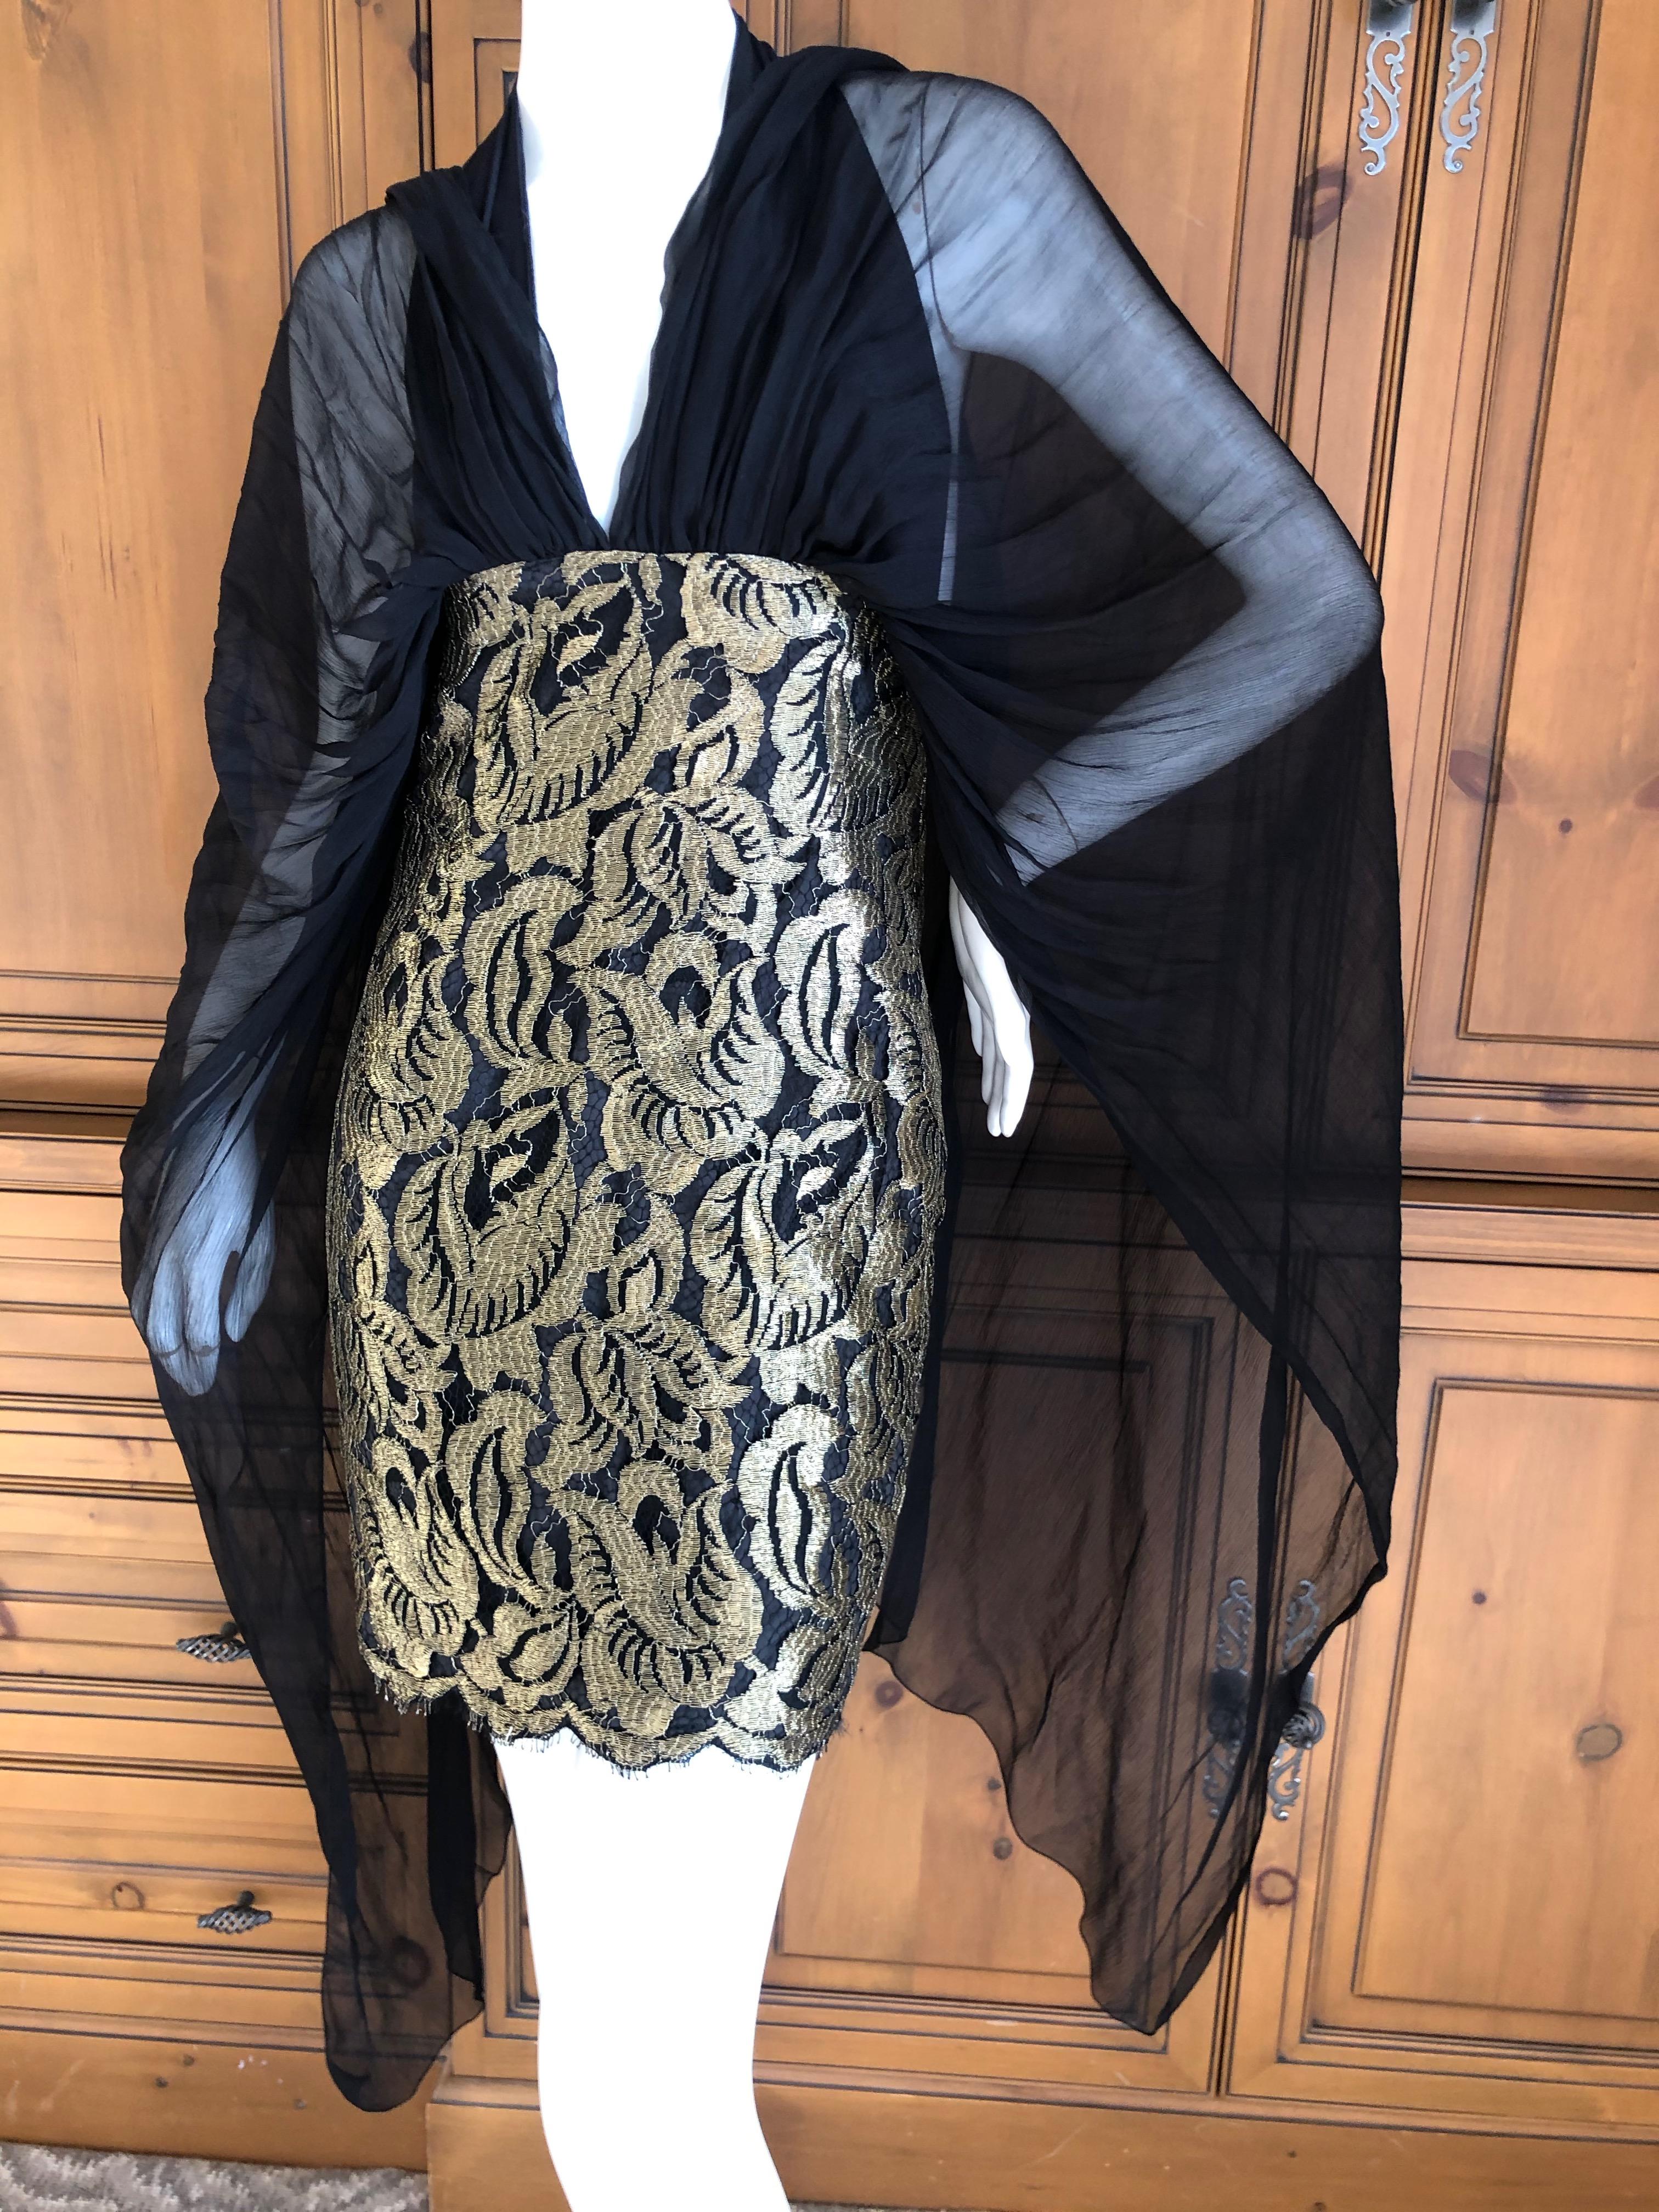 Christian Lacroix Vintage Sheer Black and Gold Lace Cocktail Dress.
This is so pretty.
 I am not certain I styled it correctly, please look through the photos to see styling option
Size S-M, no size label
Bust 36